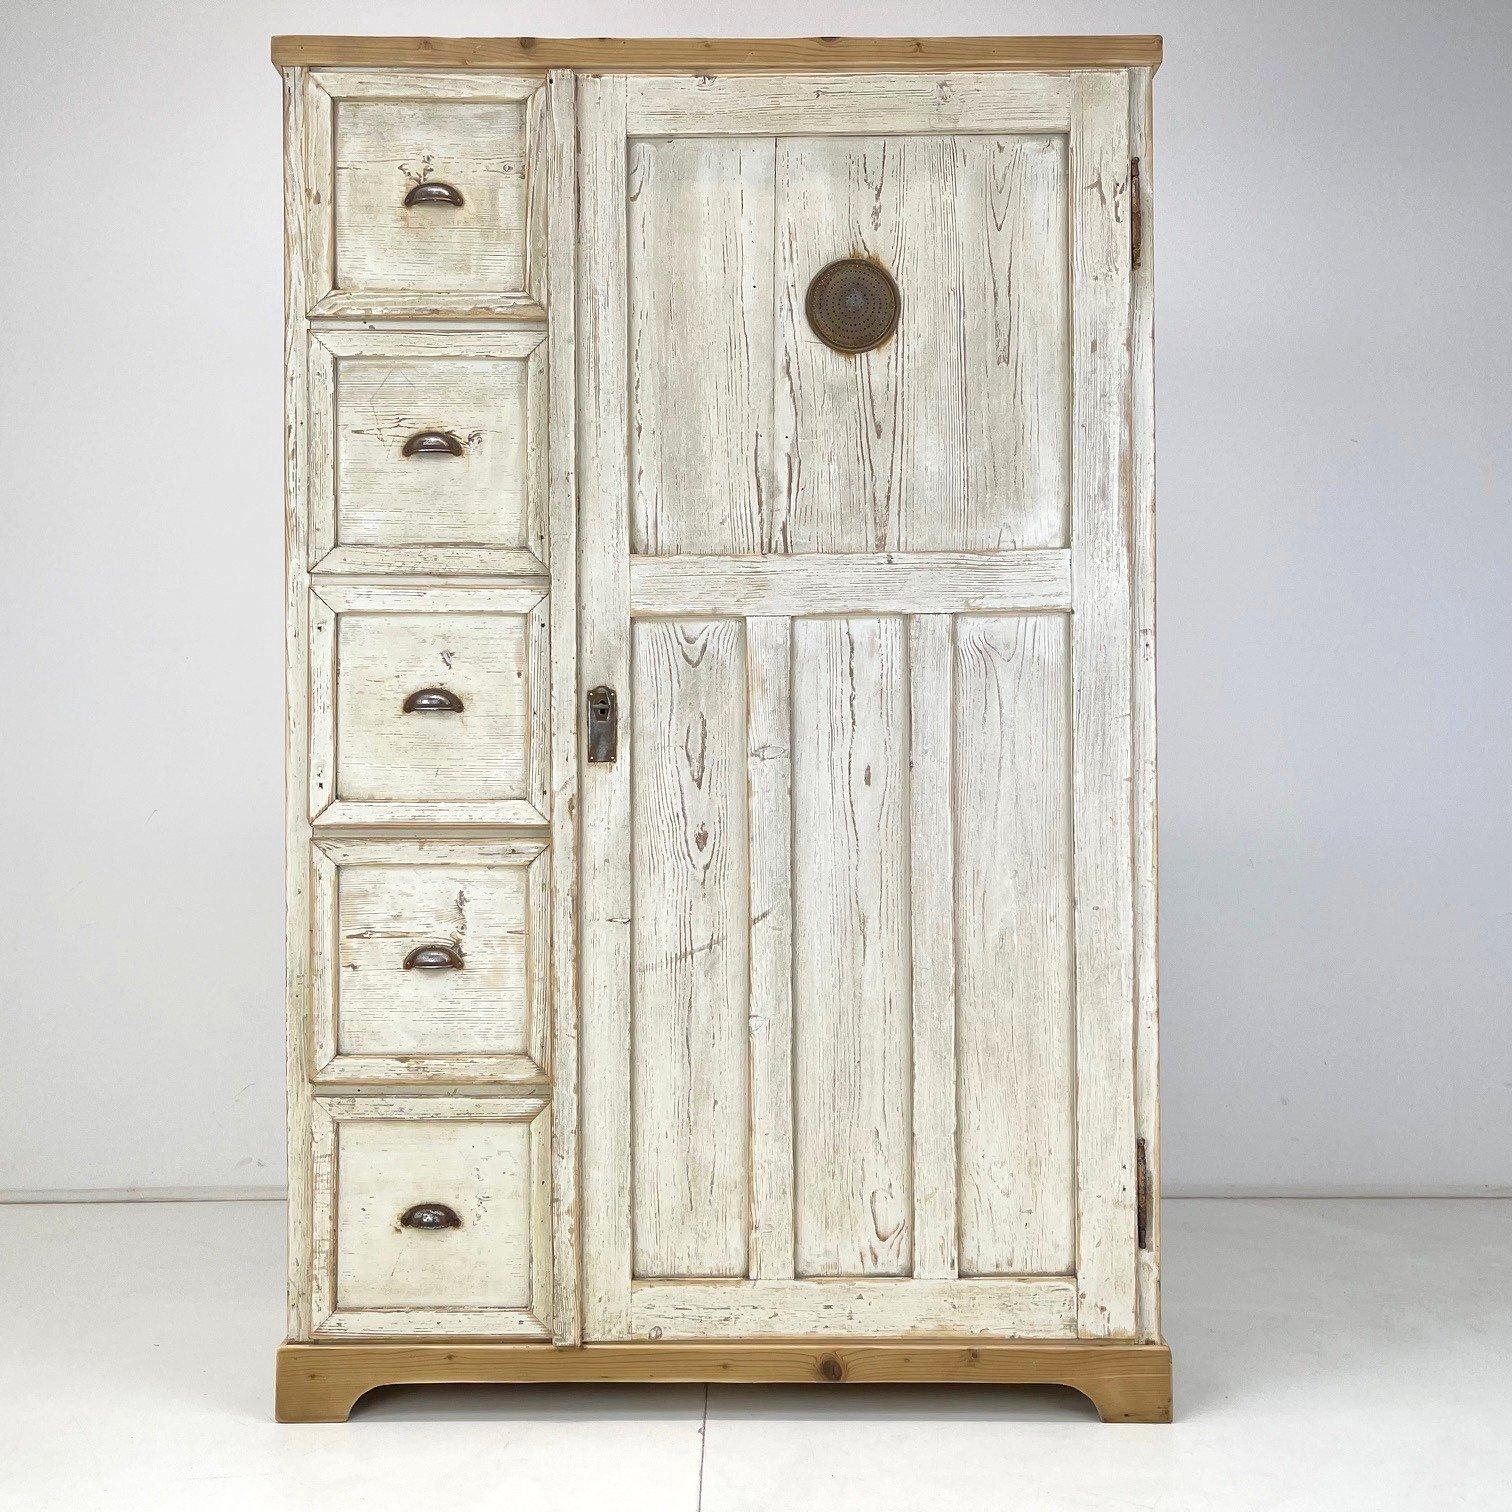 Wooden food cabinet from the end of the 19th century. It was rescued from a beautiful farmhouse in the Czech Republic. It has been thoroughly cleaned and lightly sanded. The patina and handles are original. Only the top and bottom mouldings have